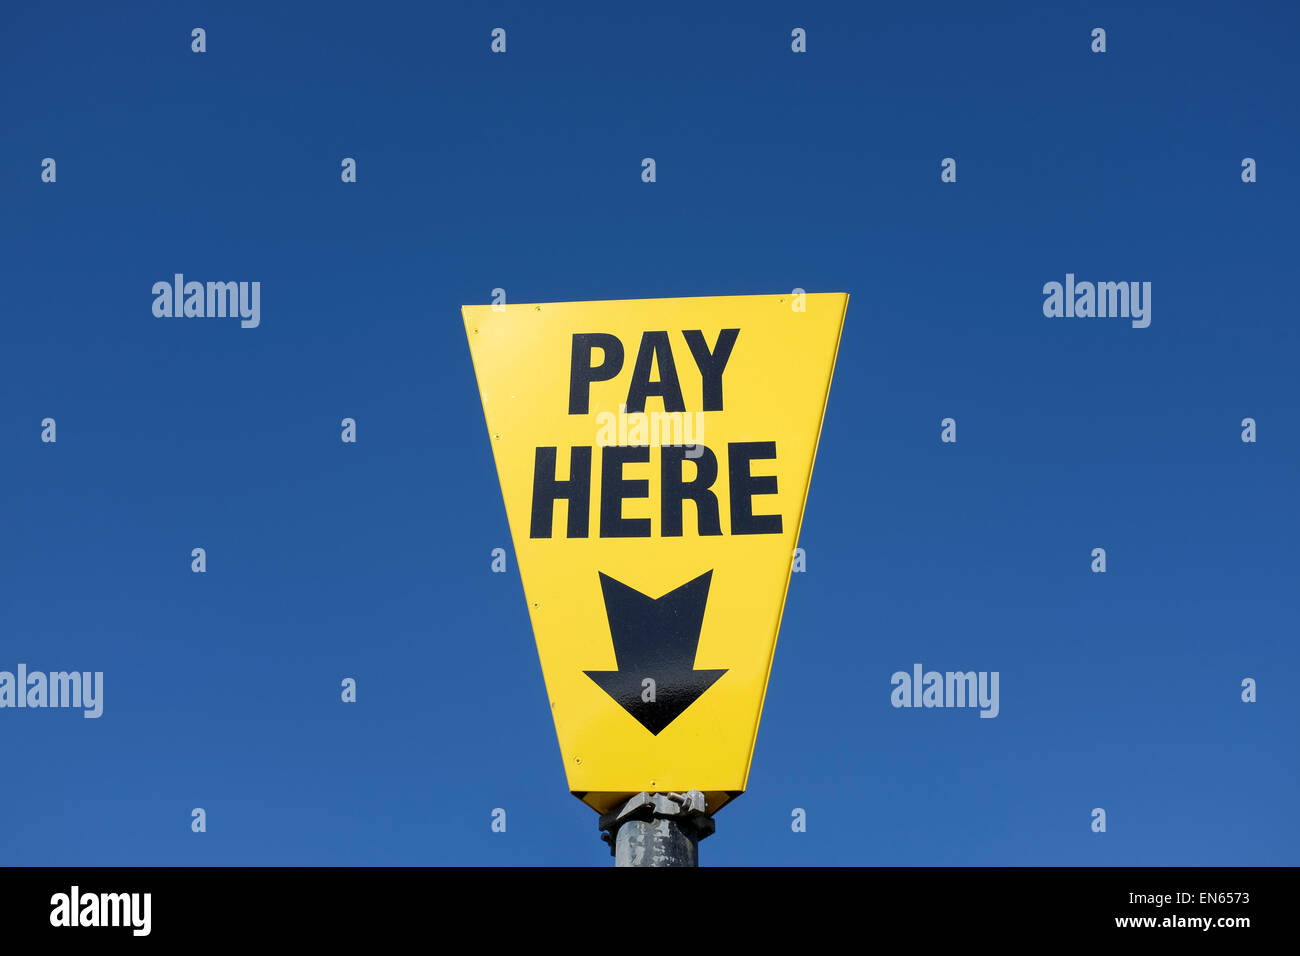 Payer jaune ici sign against a blue sky background with copy space Banque D'Images